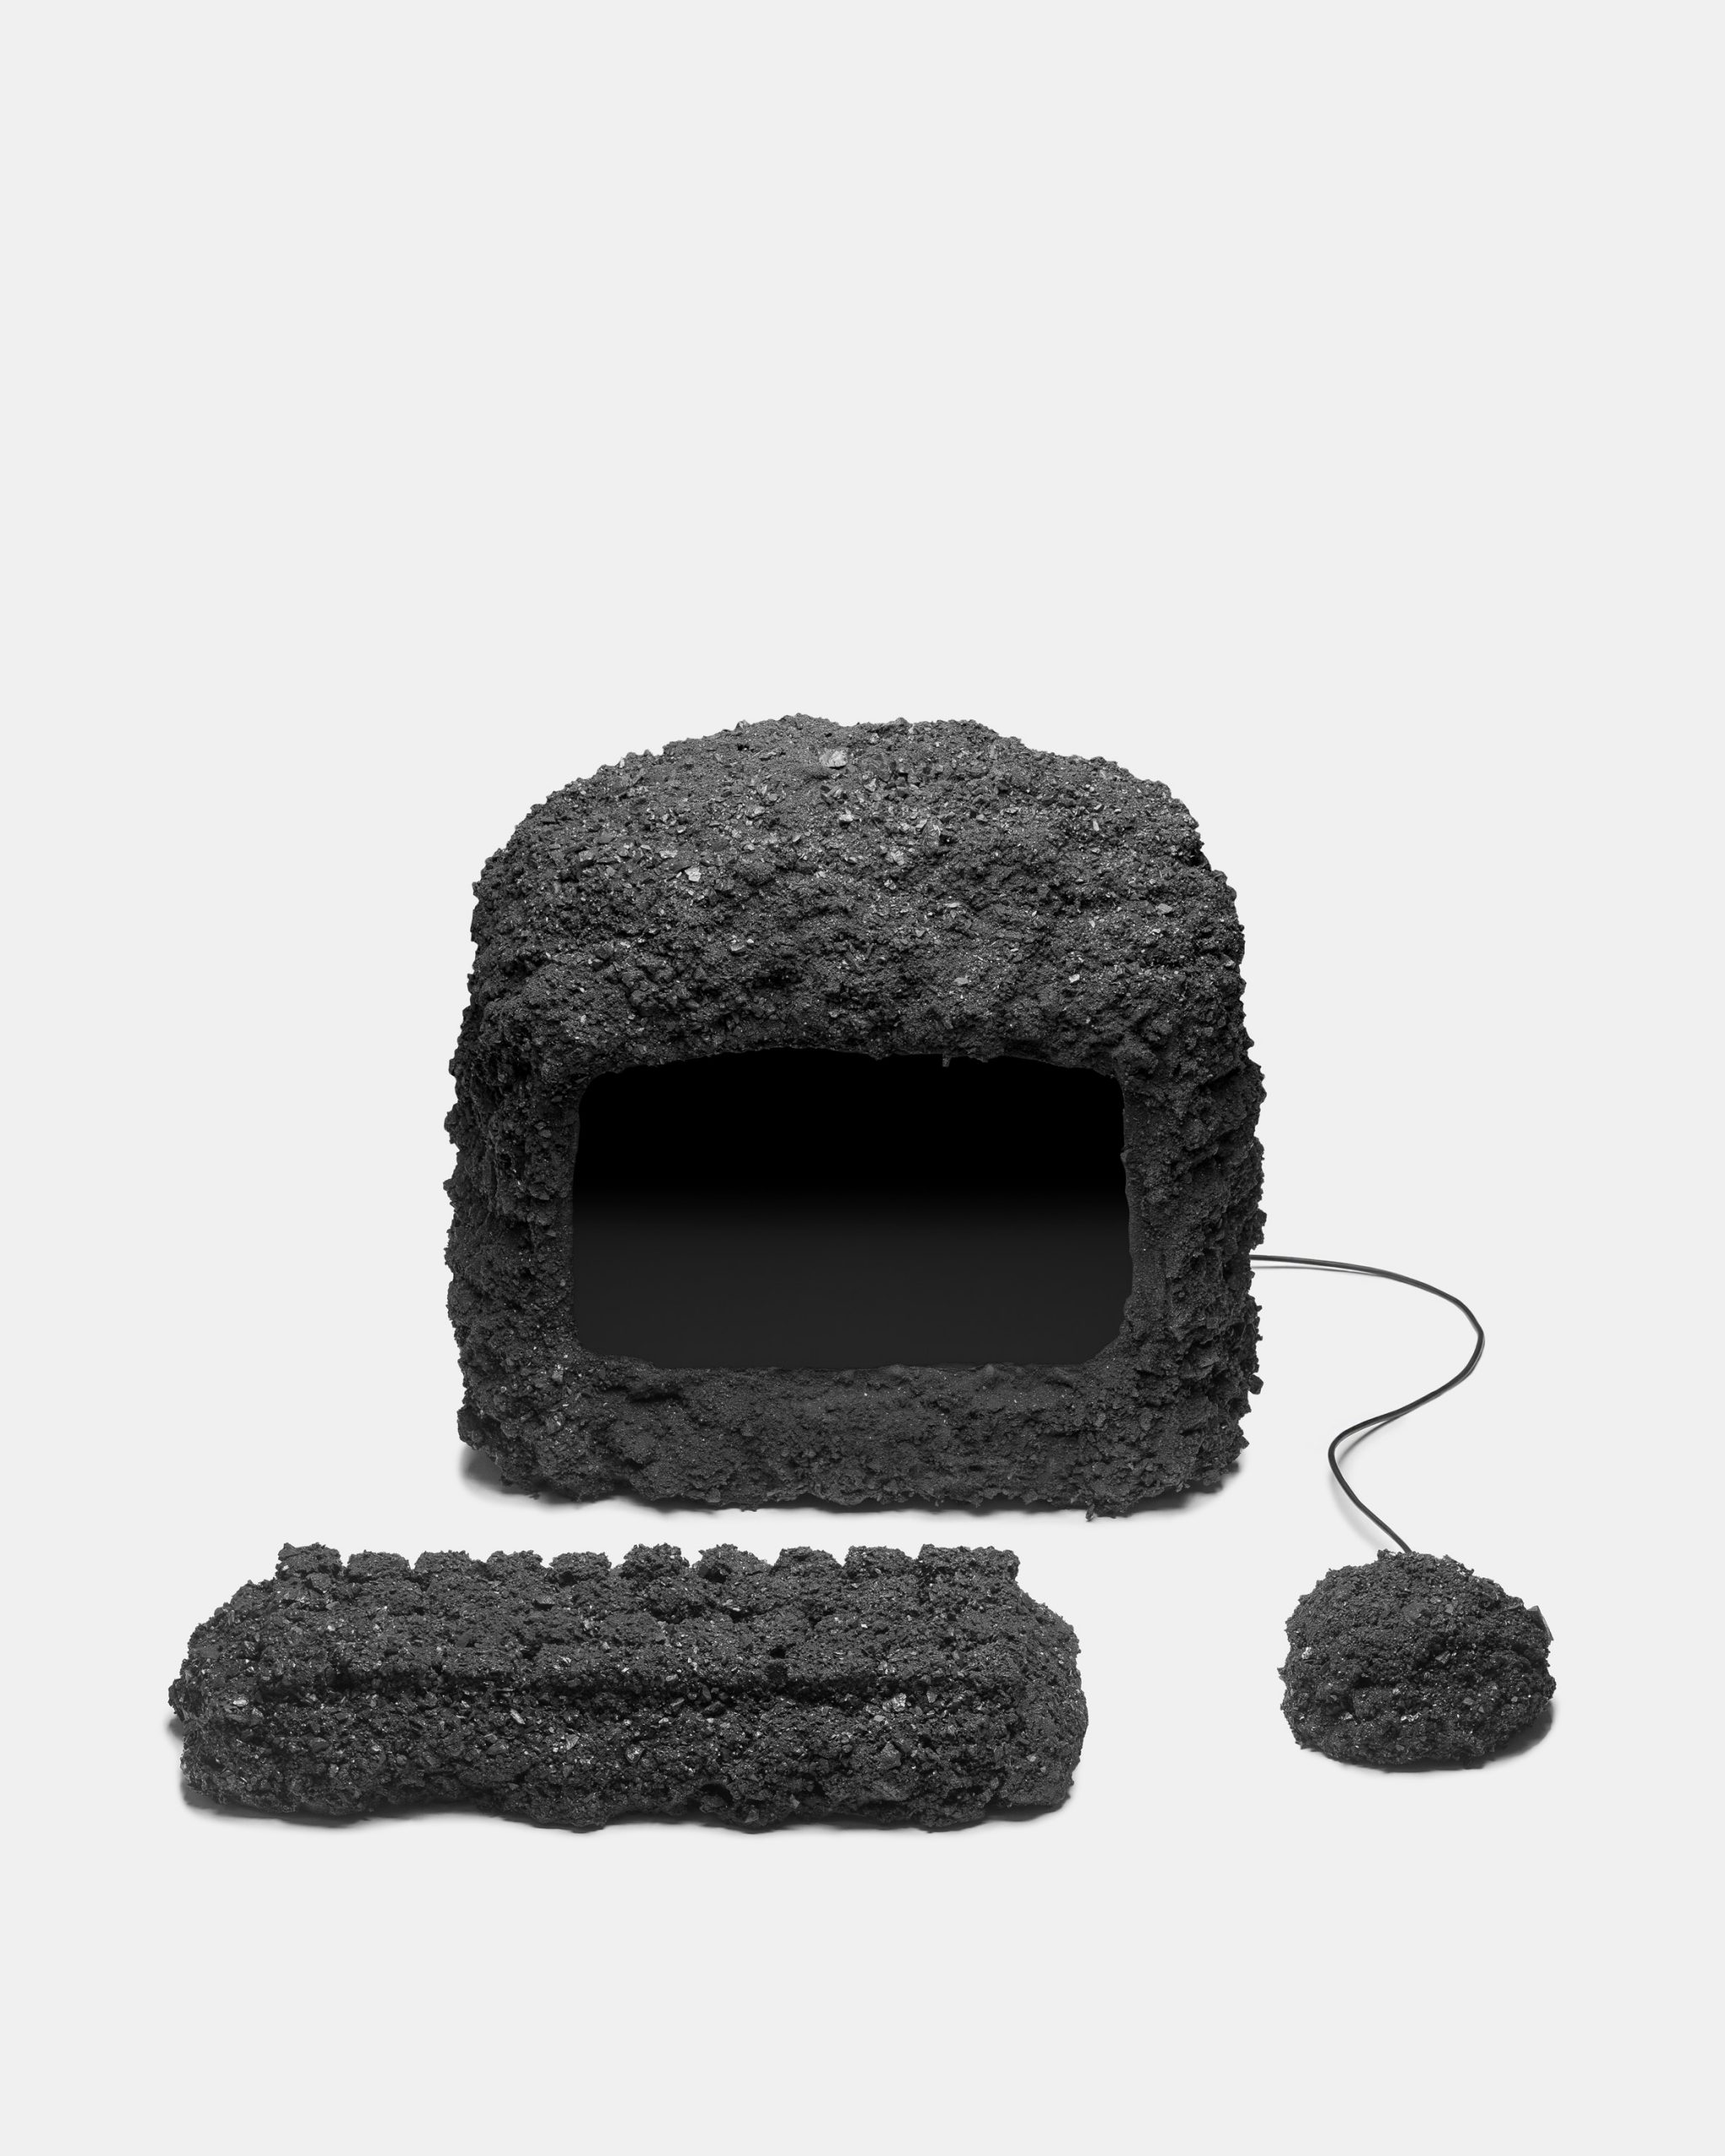 Desktop computer and mouse made of coal